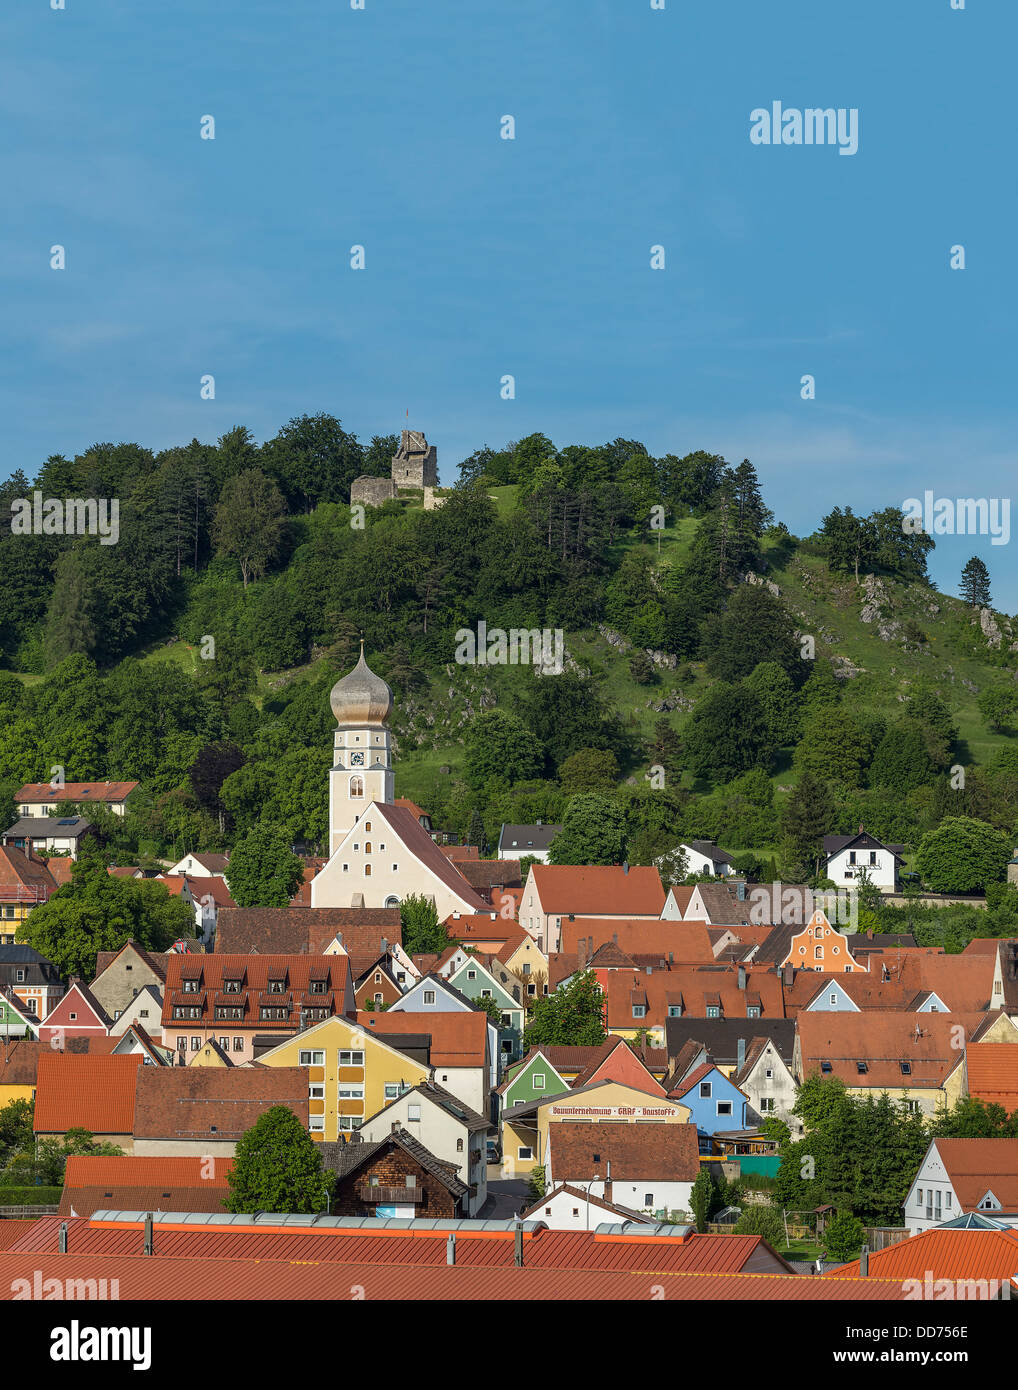 Germany, Bavaria, View of St John church and castle at Velburg Stock Photo